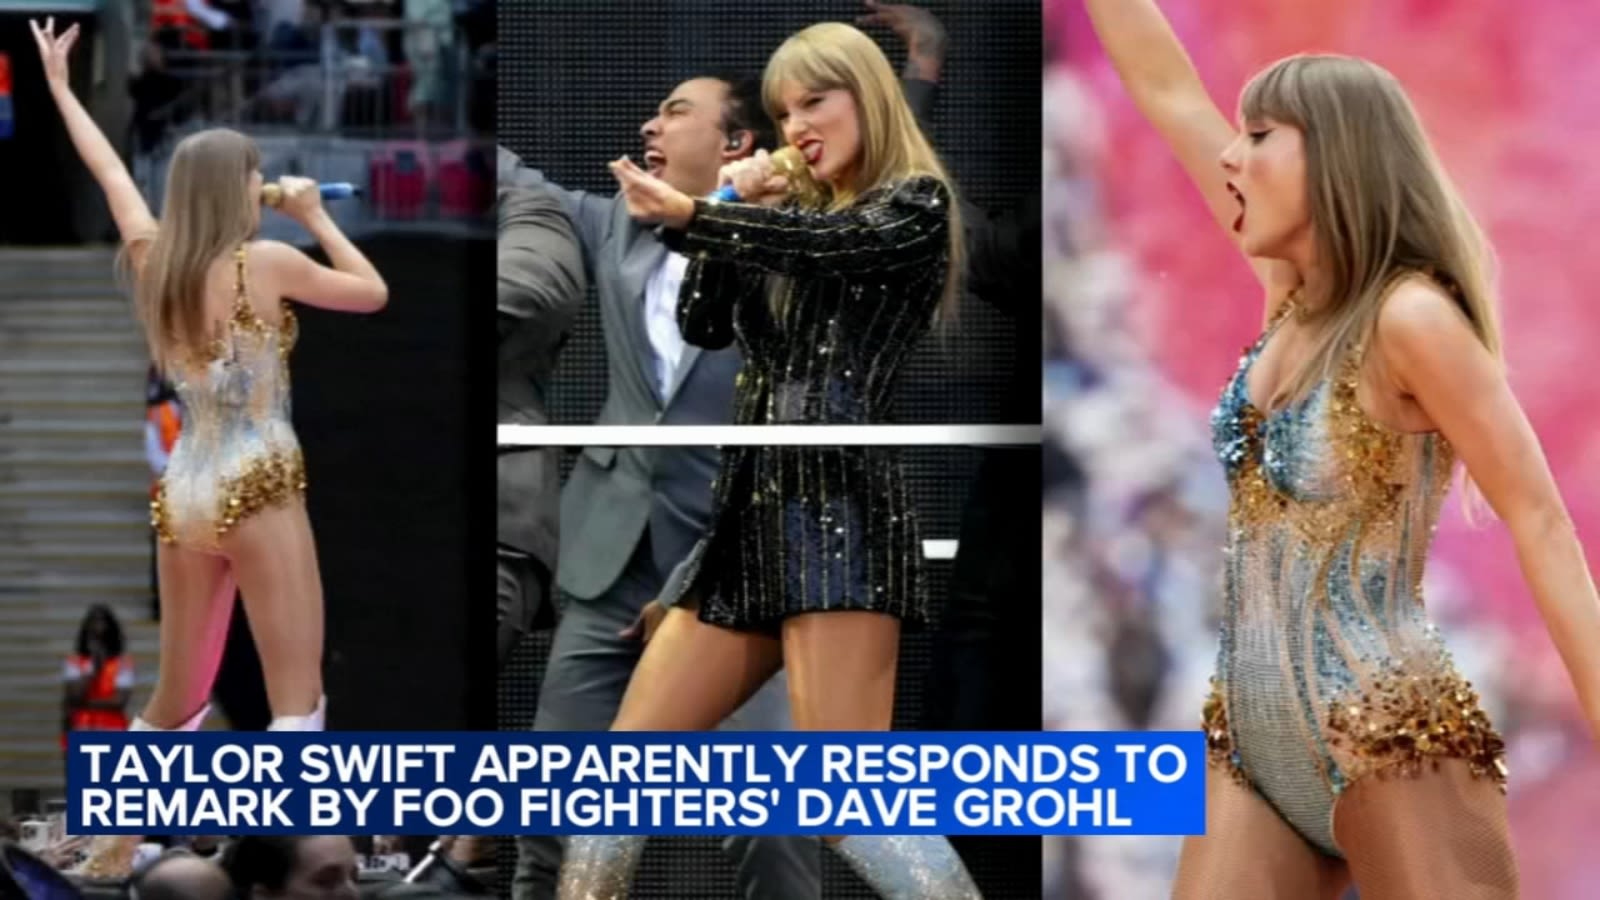 Taylor Swift seems to respond to Dave Grohl's suggestion she doesn't perform live